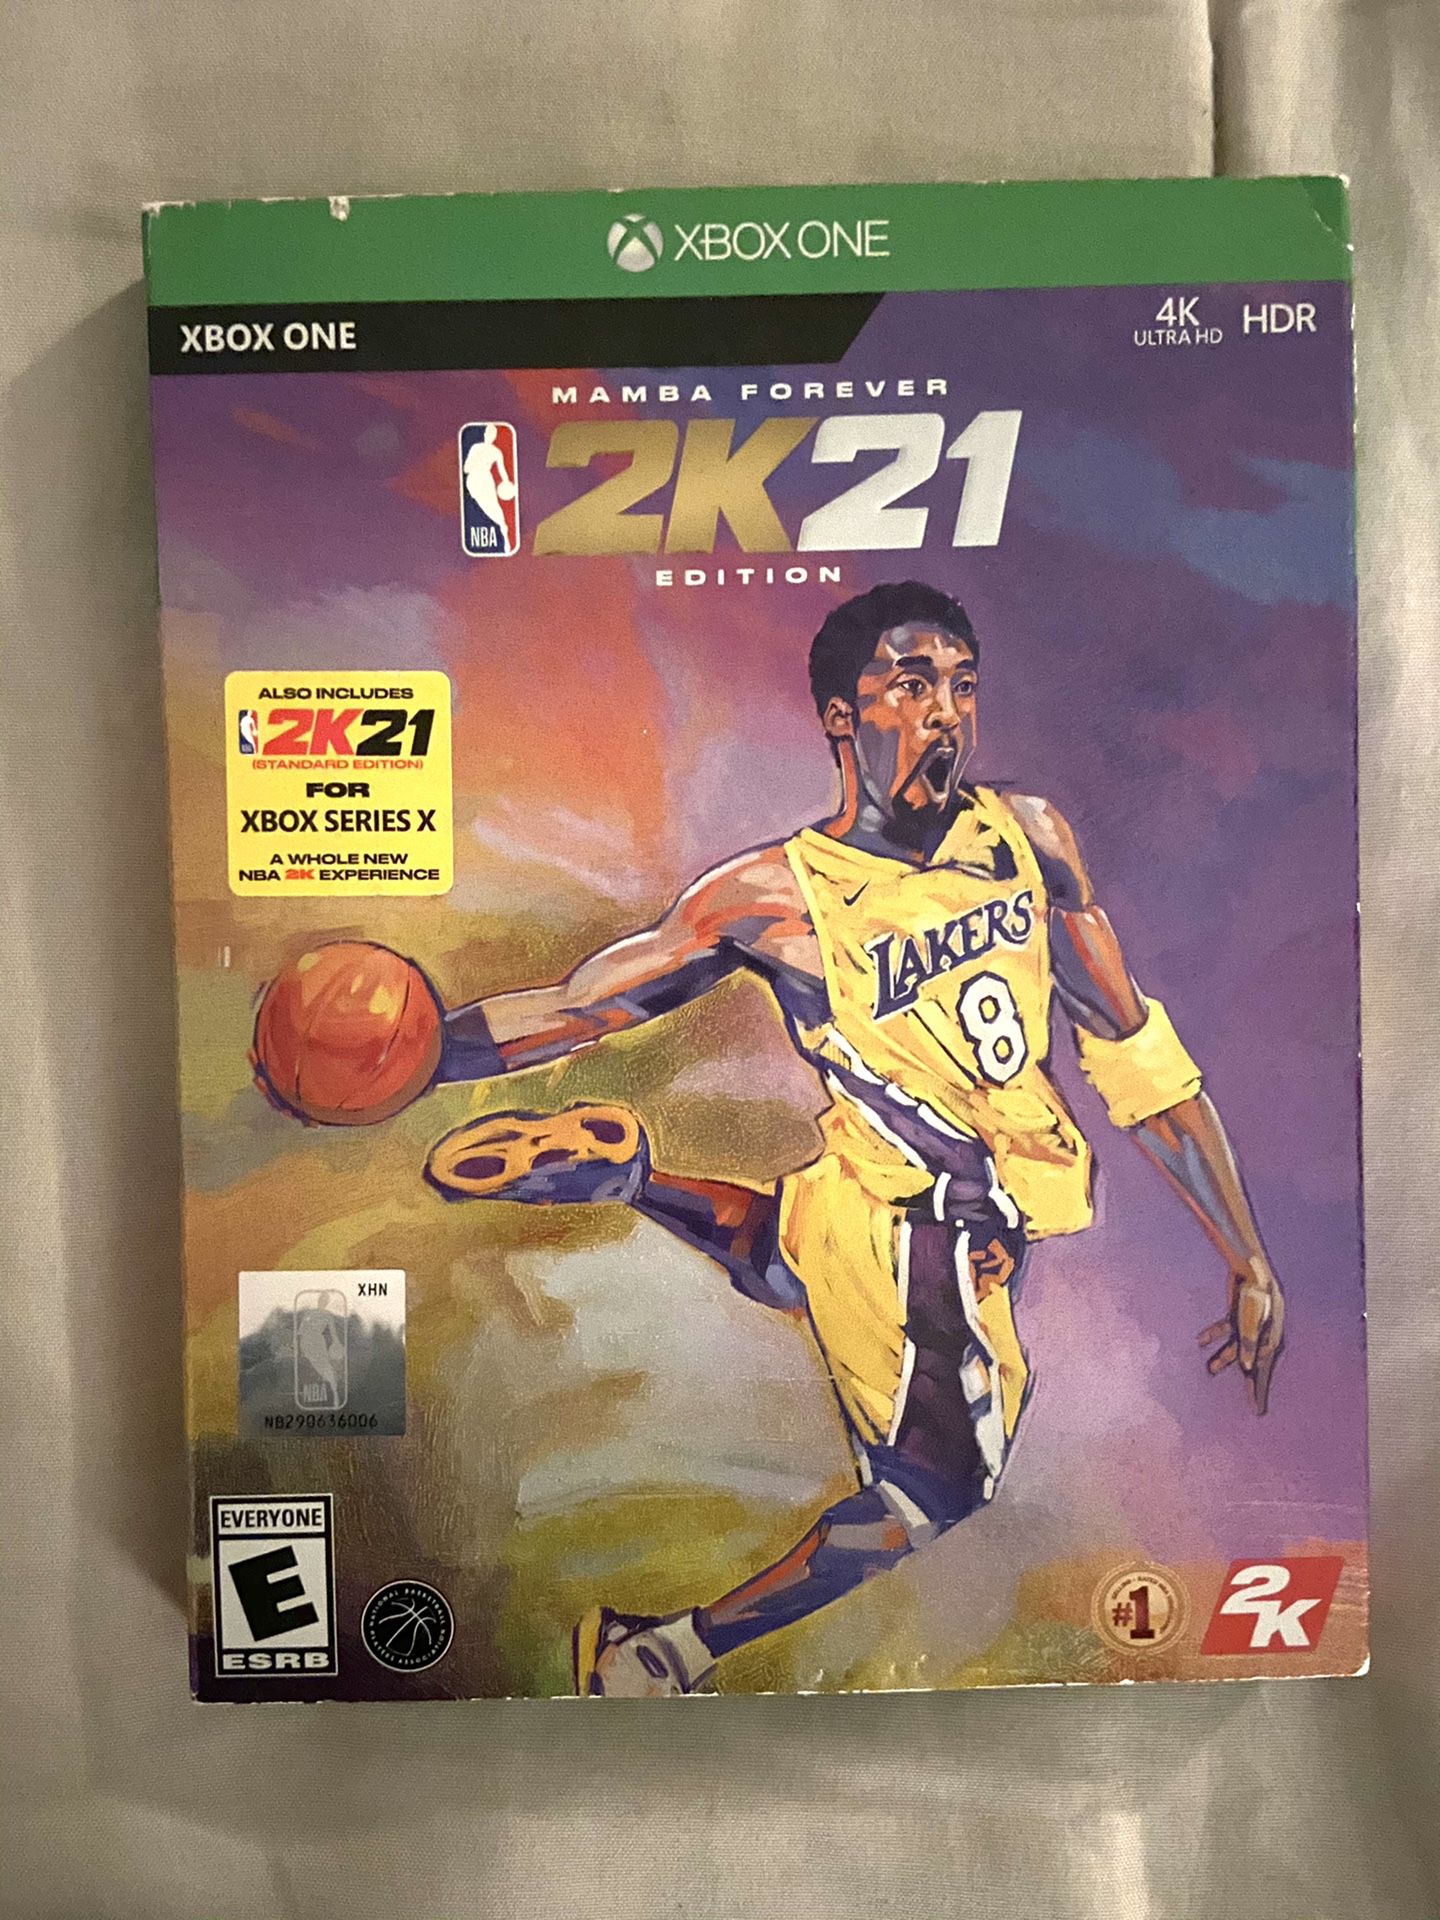 XBOX ONE 2K21 Mamba Forever Edition